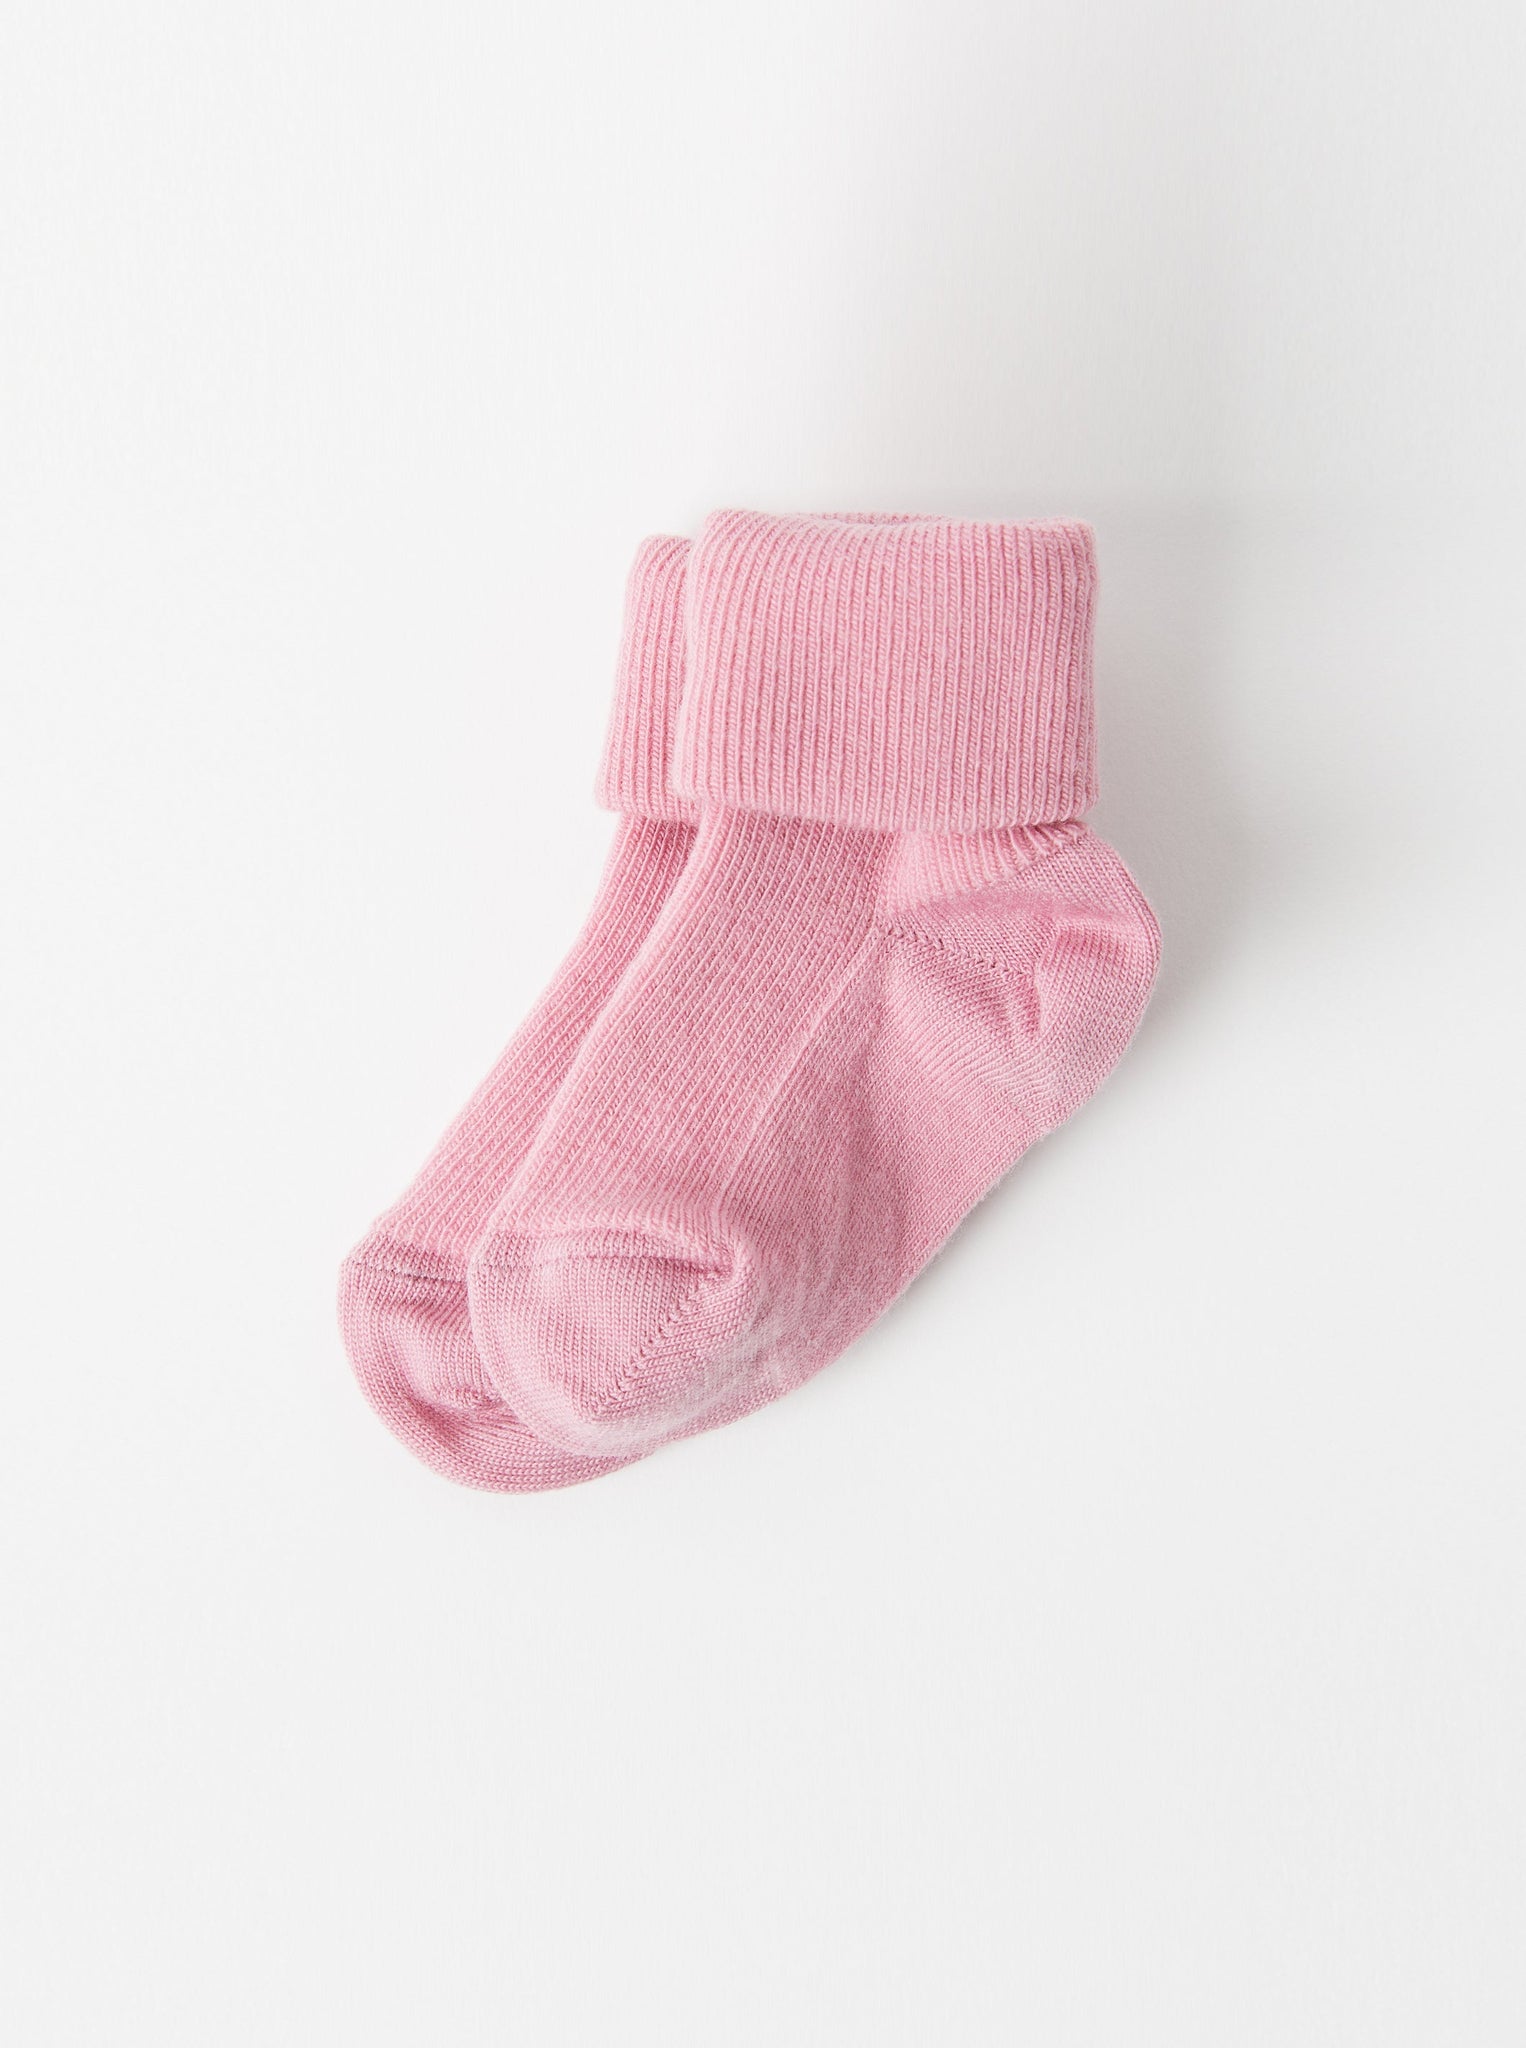 Pink Merino Wool Baby Socks from the Polarn O. Pyret kidswear collection. Made from sustainable sources.